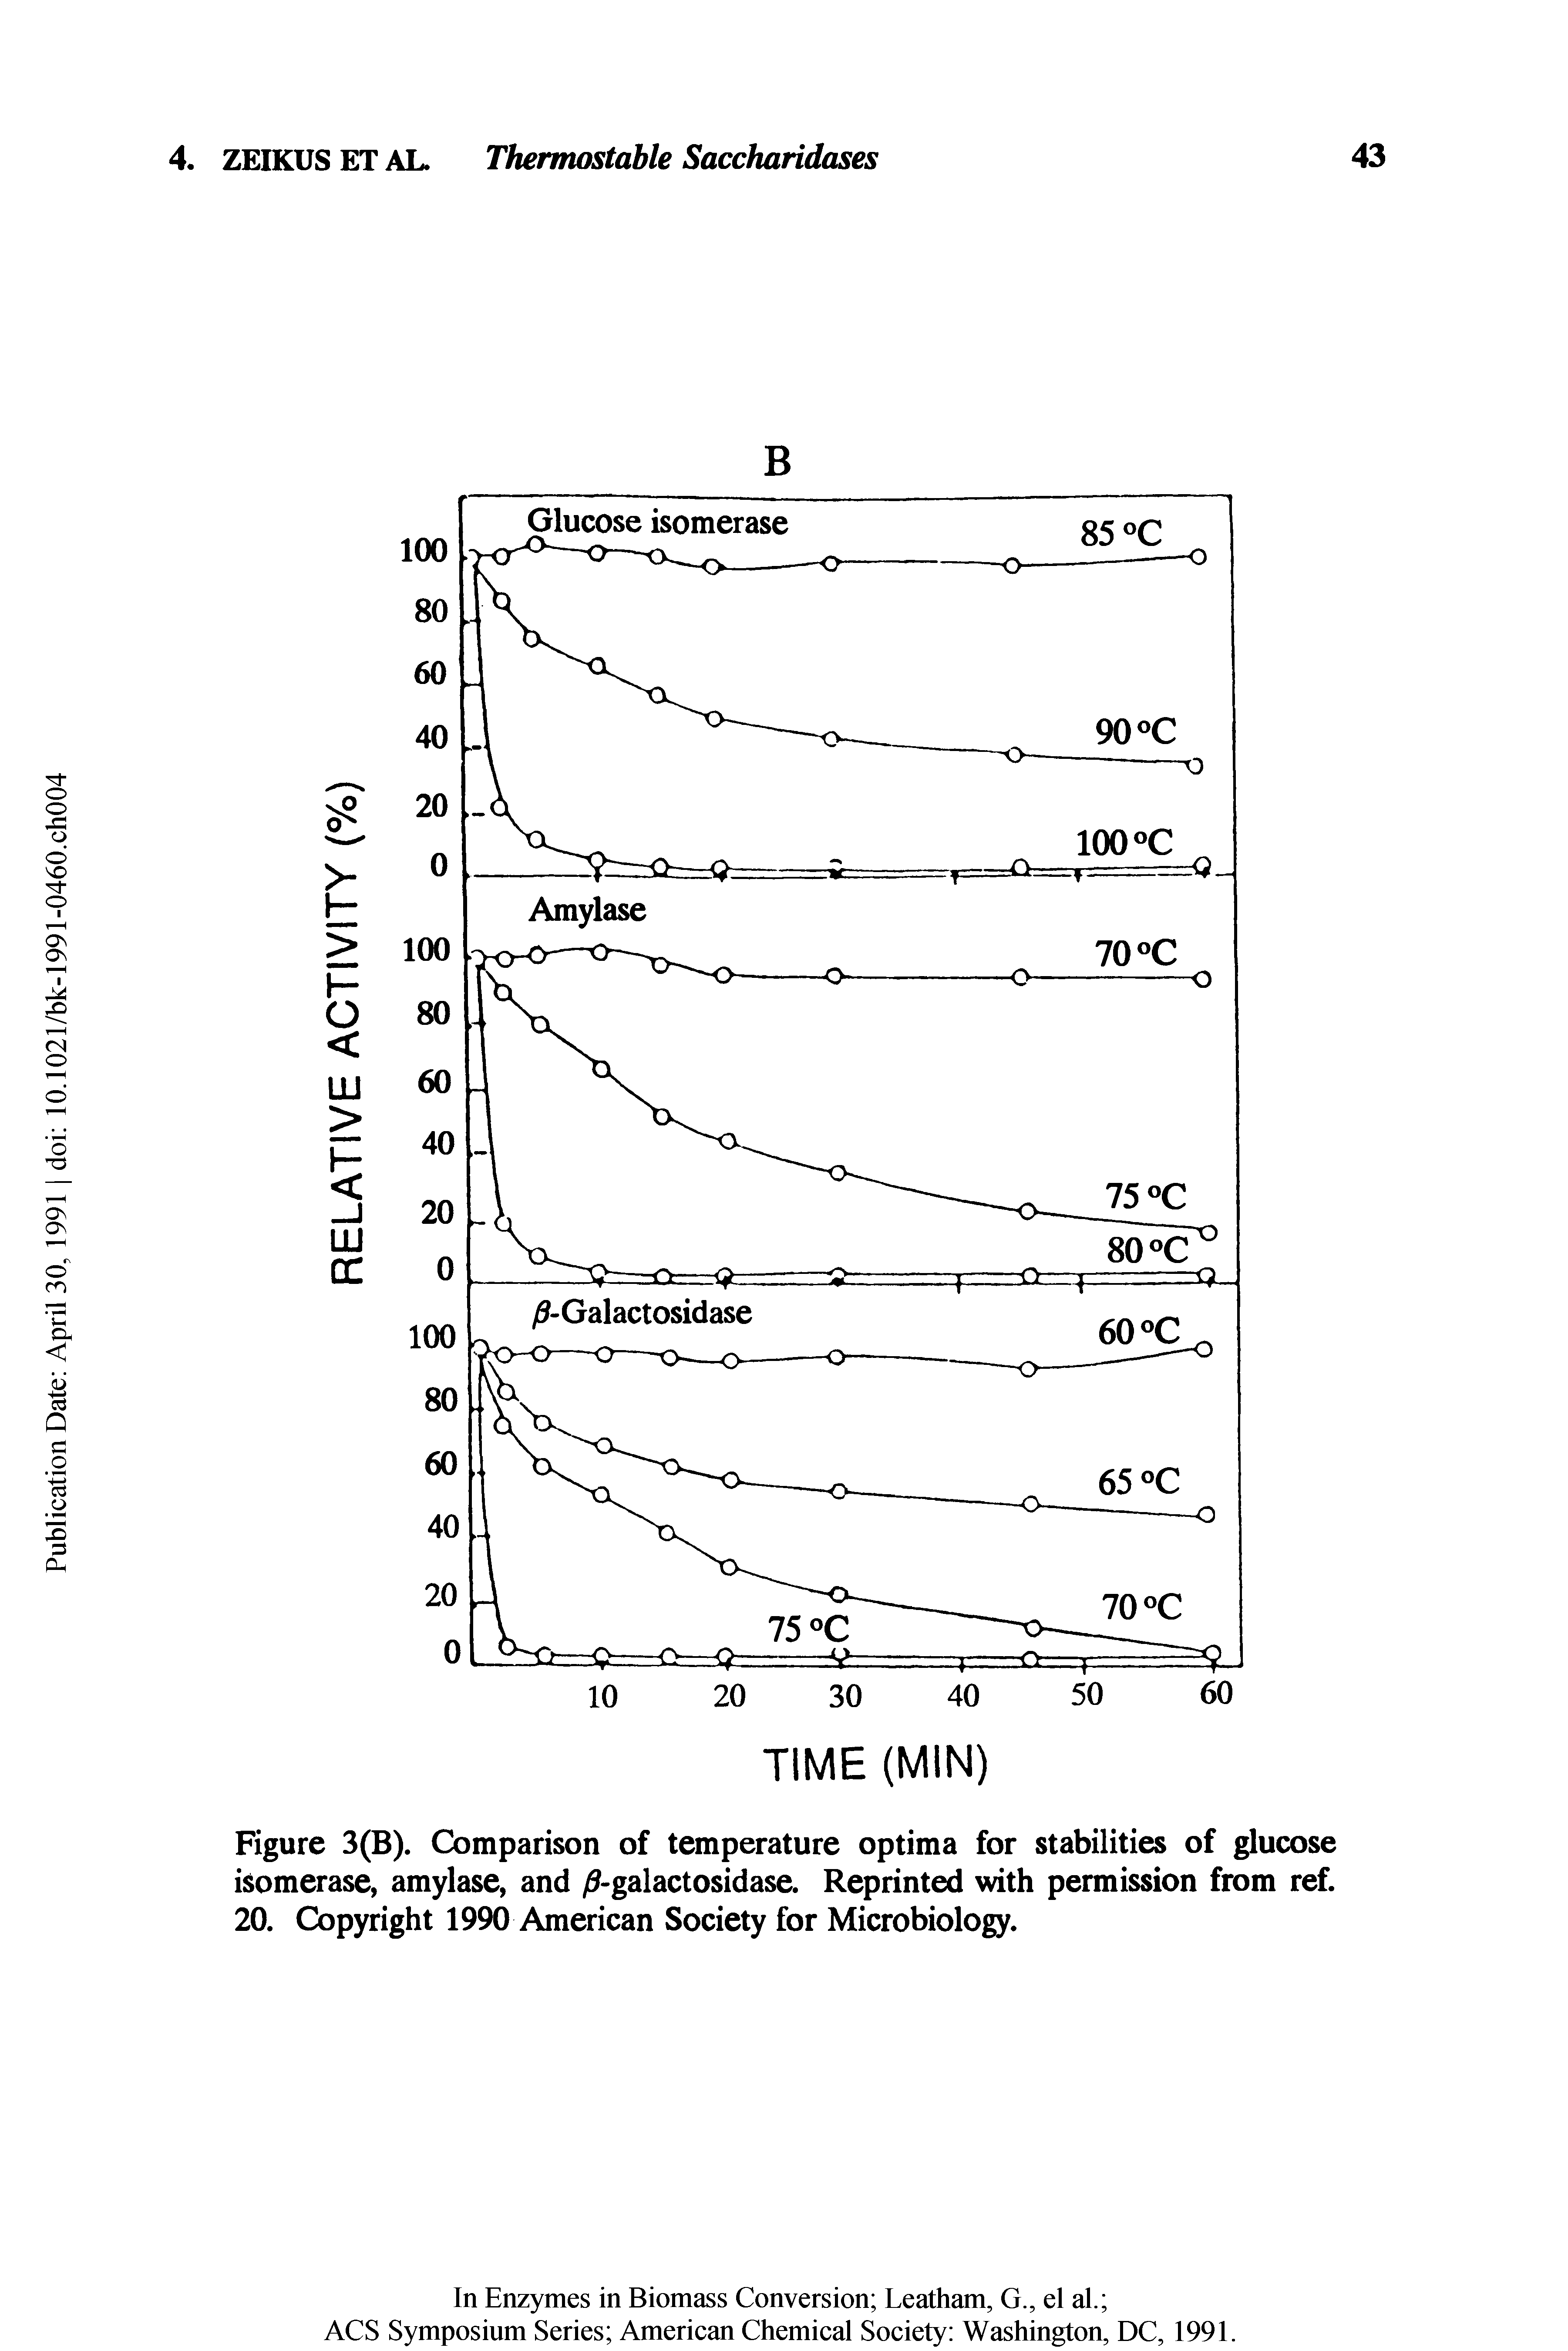 Figure 3(B). Comparison of temperature optima for stabilities of glucose isomerase, amylase, and d-galactosidase. Reprinted with permission from ref. 20. Copyright 1990 American Society for Microbiology.